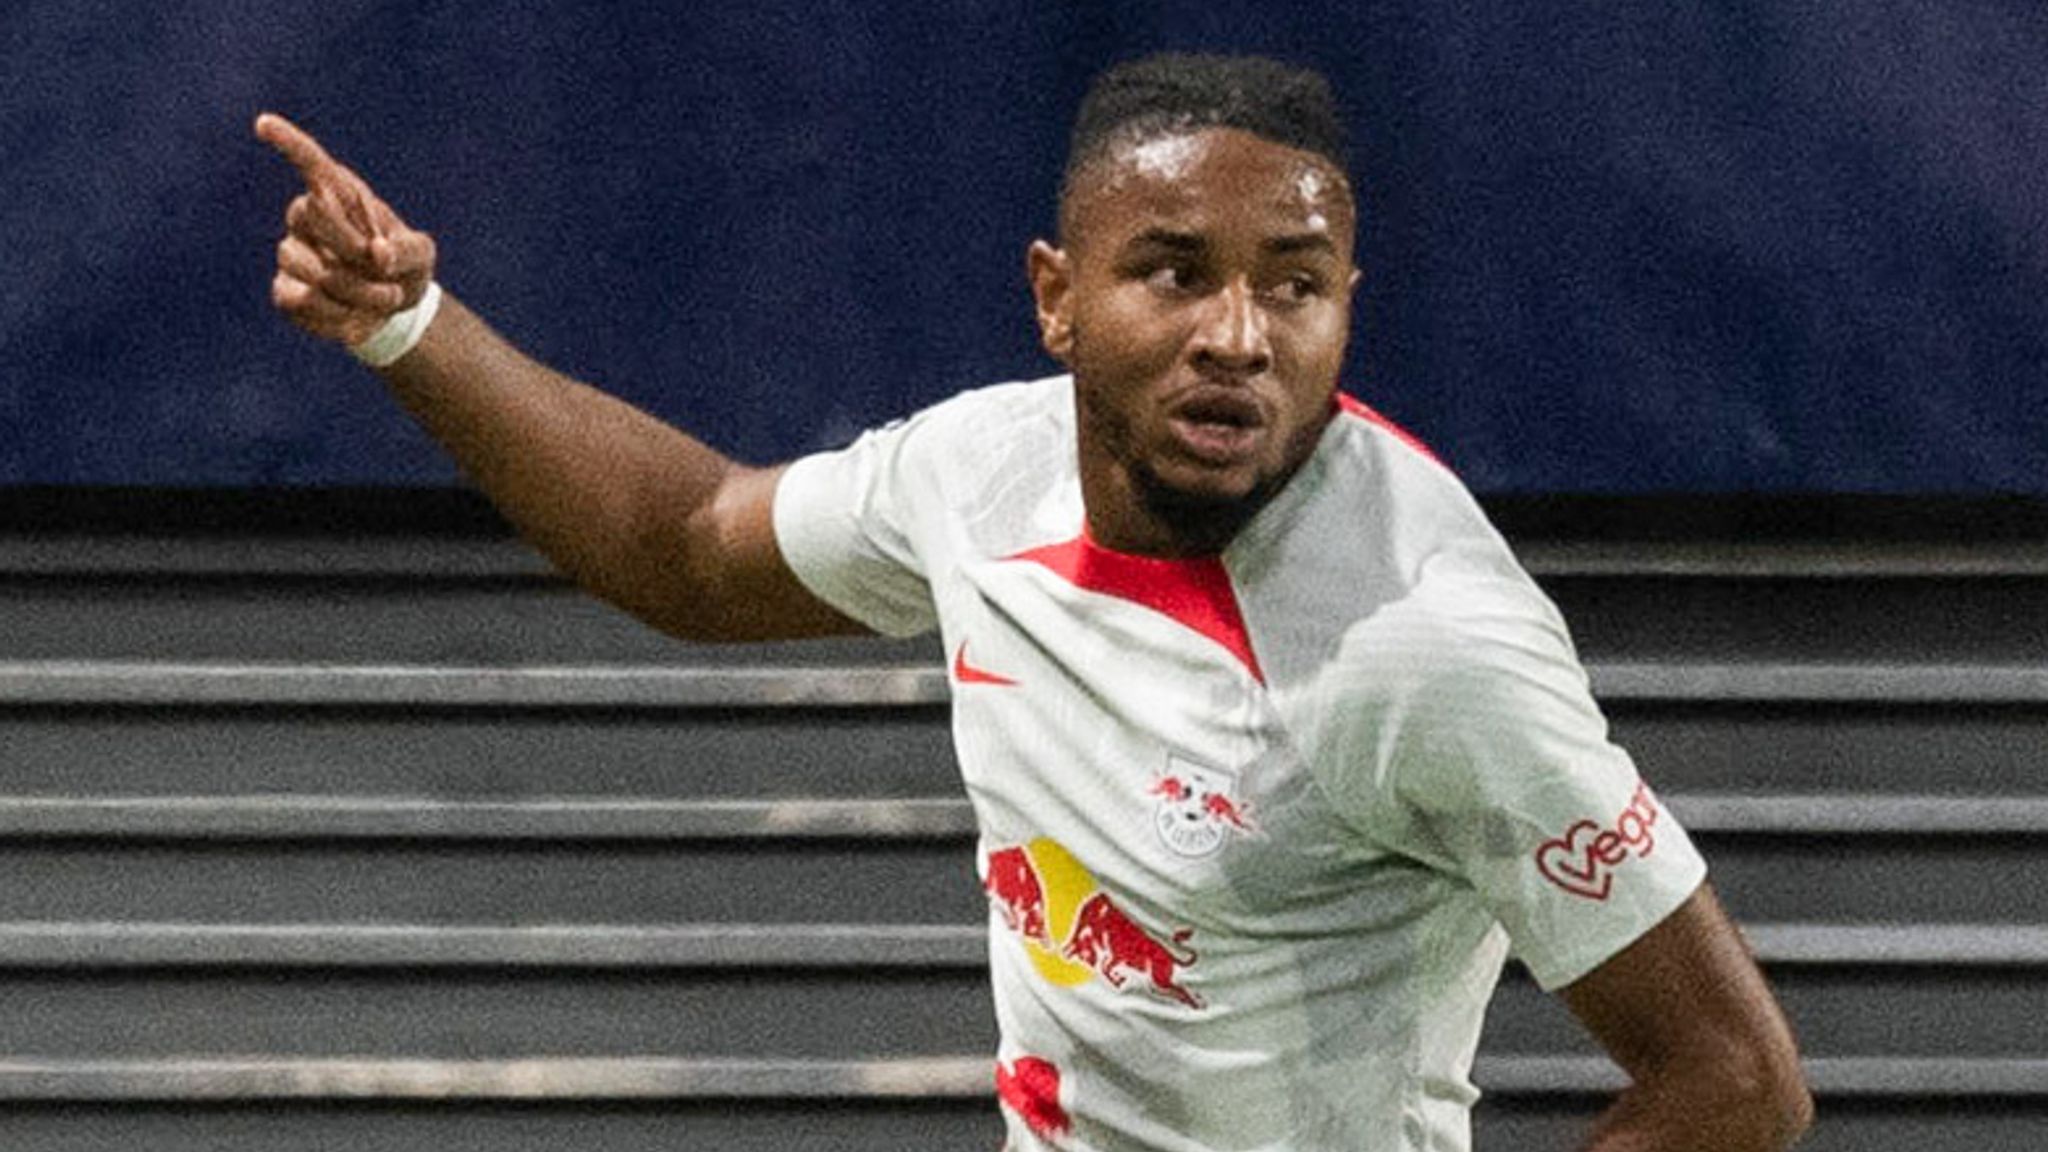 RB Leipzig 3-1 Celtic Christopher Nkunku scores in dramatic Champions League encounter Football News Sky Sports